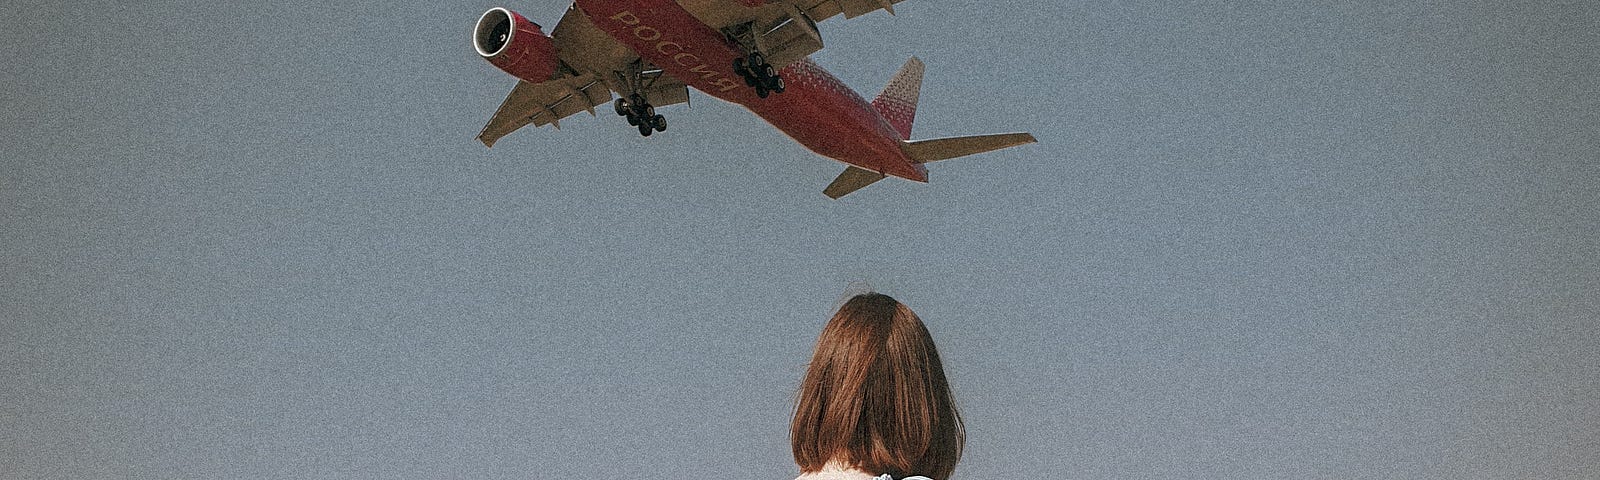 Woman in blue dress watching plane go by